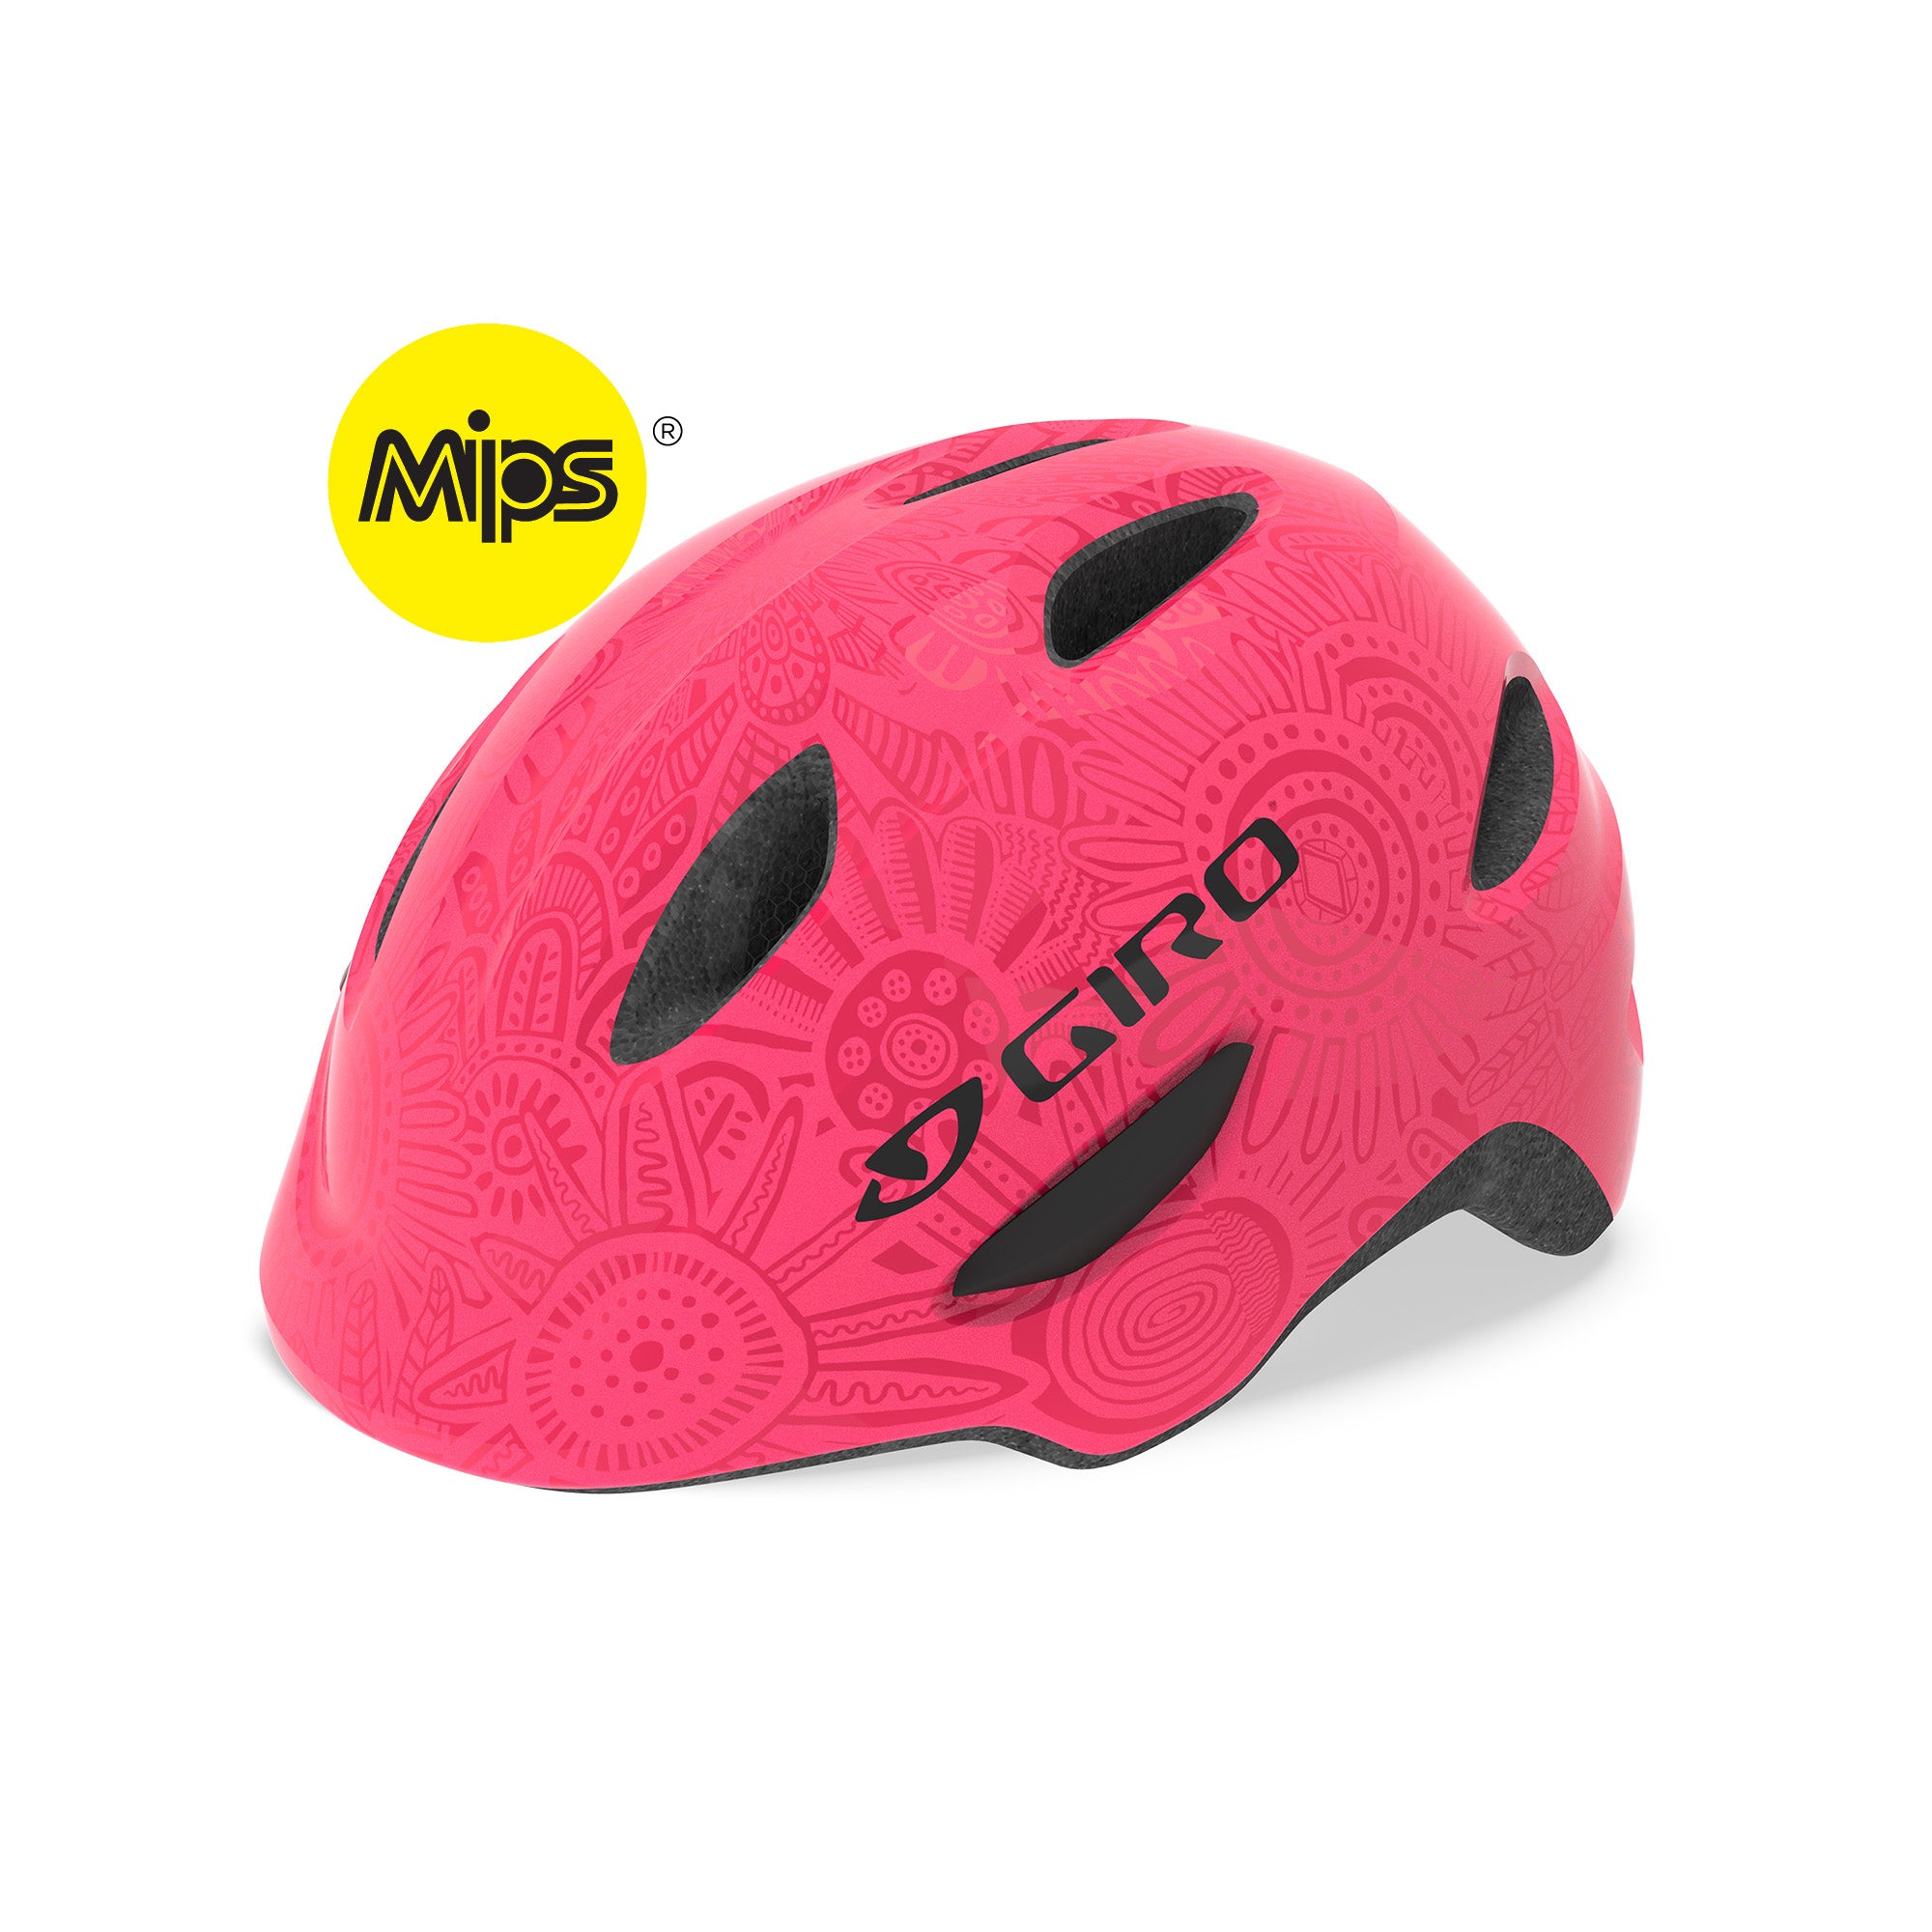 Giro Scamp Pink Pearl Mips